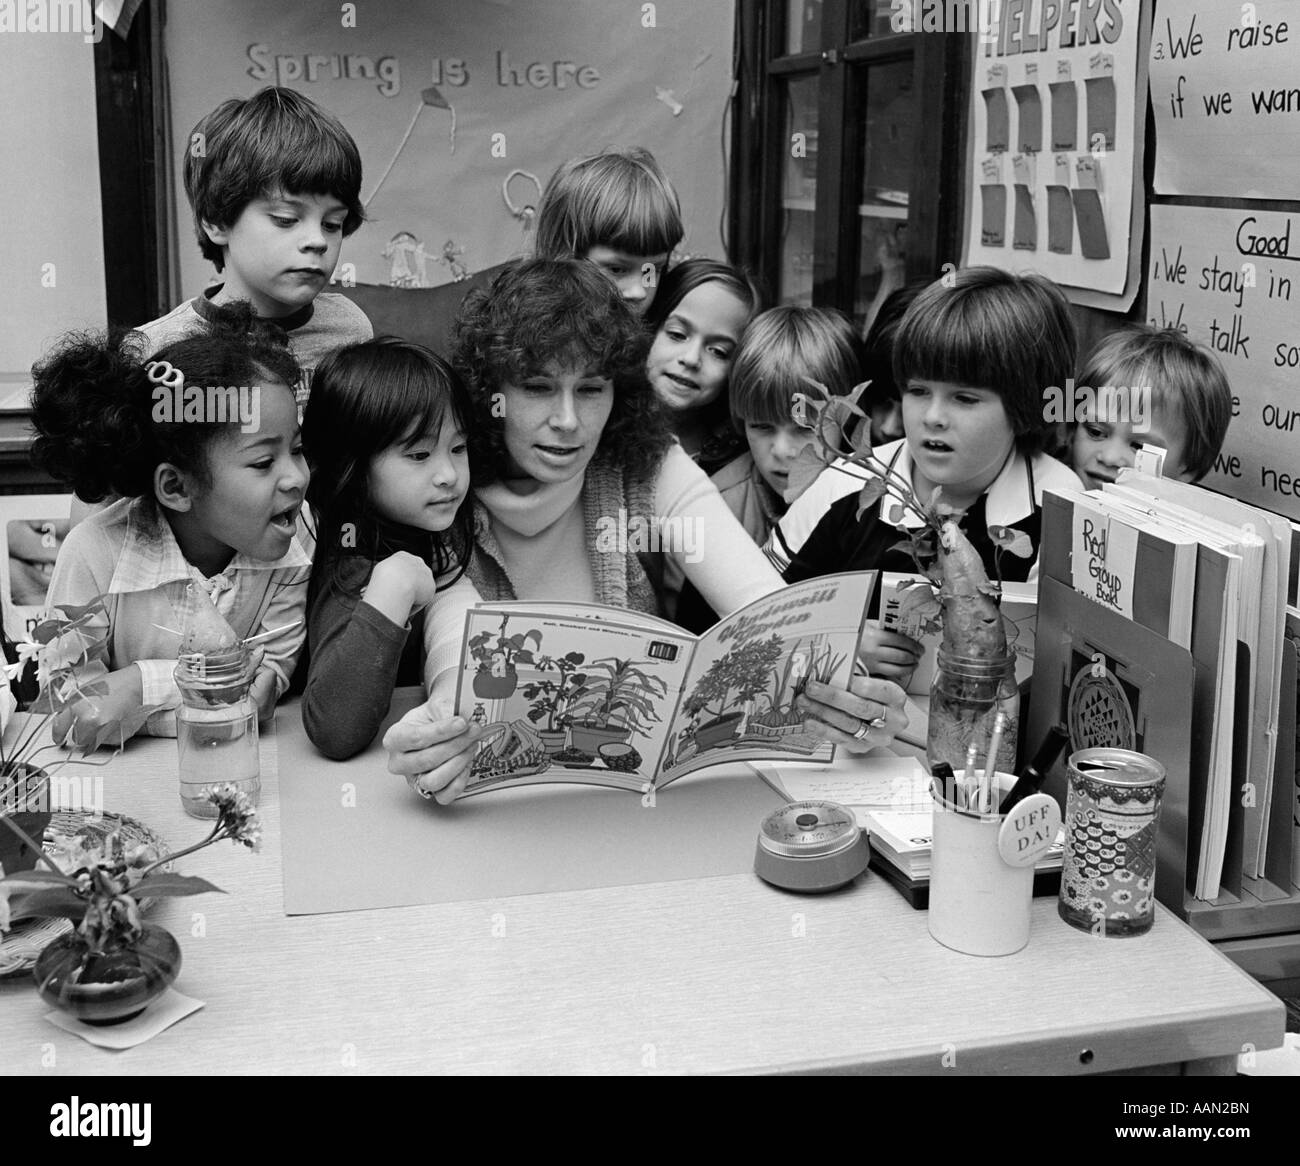 1980s TEACHER READING BOOK TO GROUP OF GRADE SCHOOL STUDENTS GATHERED AROUND HER Stock Photo